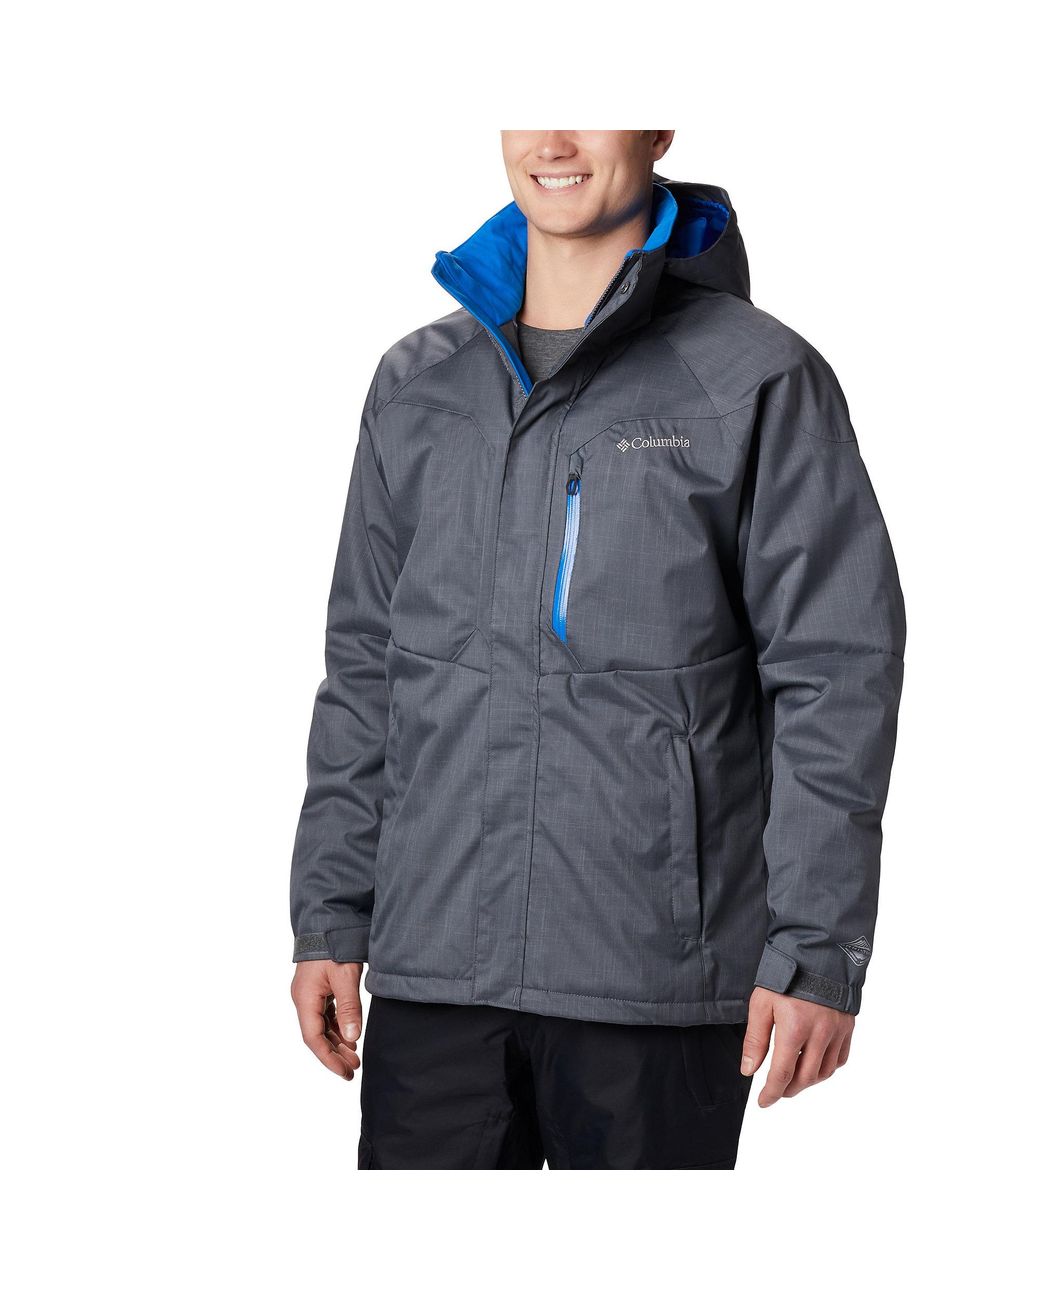 Columbia Alpine Action in Blue for Men - Lyst